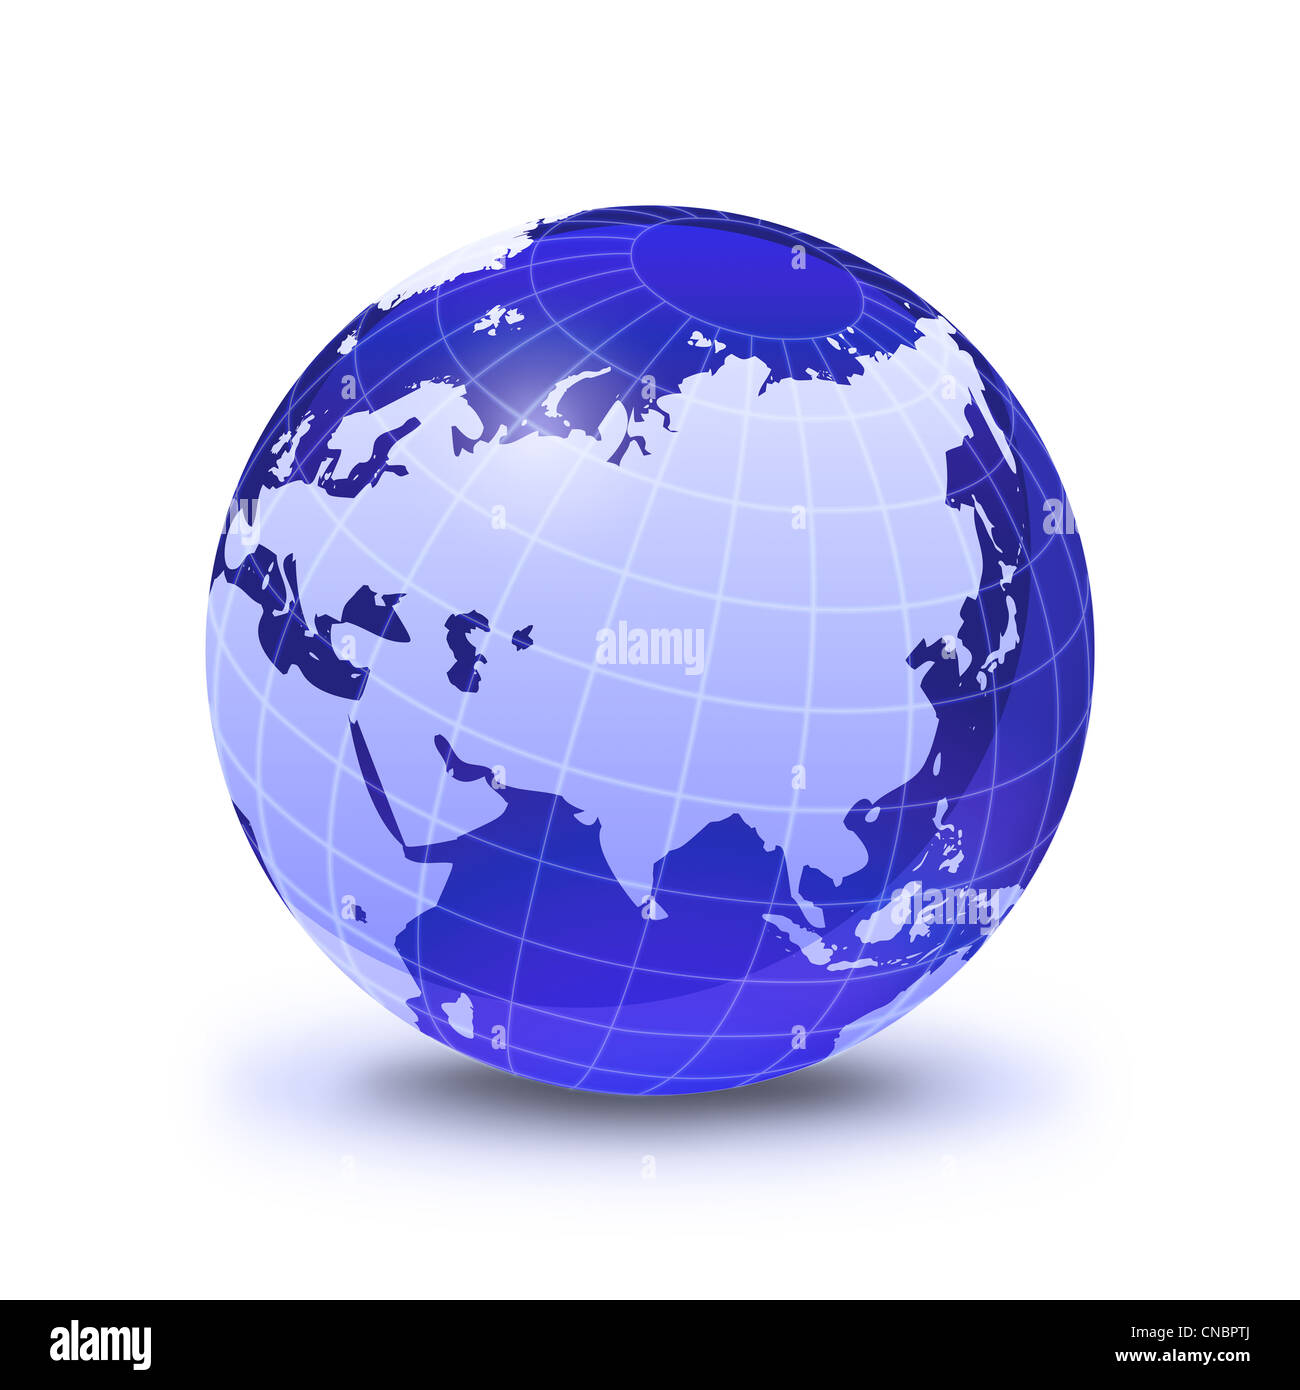 Earth globe stylized, in blue color, shiny and with white glowing grid. On white surface with shadow. Asia and East Europe view. Stock Photo